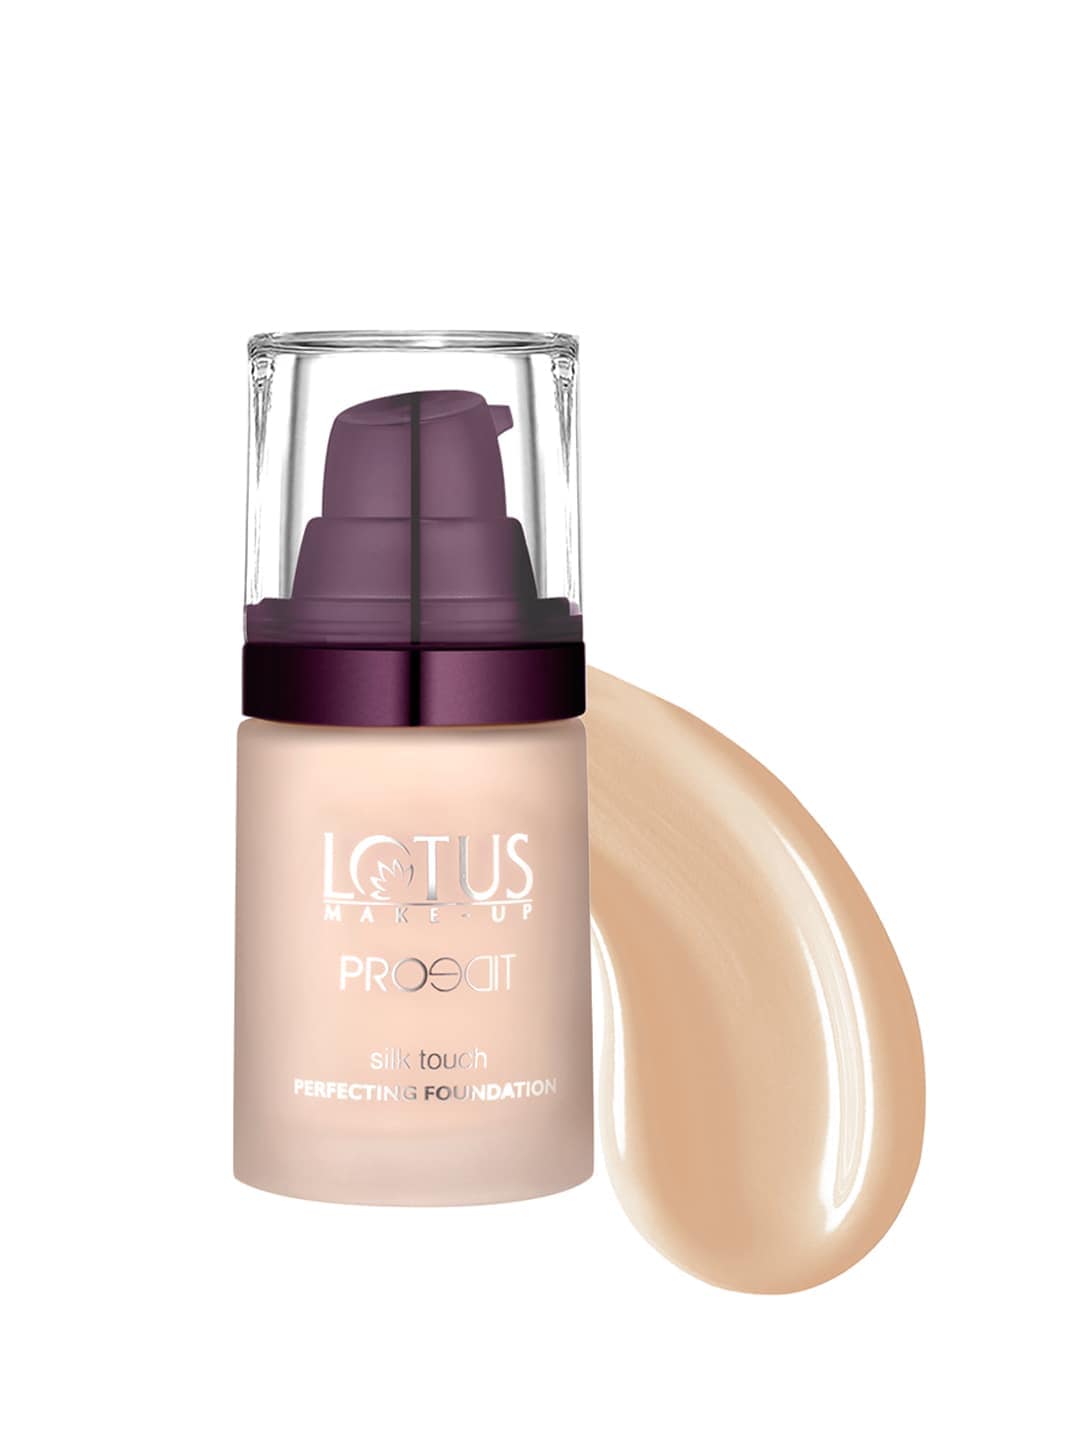 Lotus Herbals Sustainable Proedit Silk Touch Perfecting Foundation - Porcelain SF01 30 ml Price in India